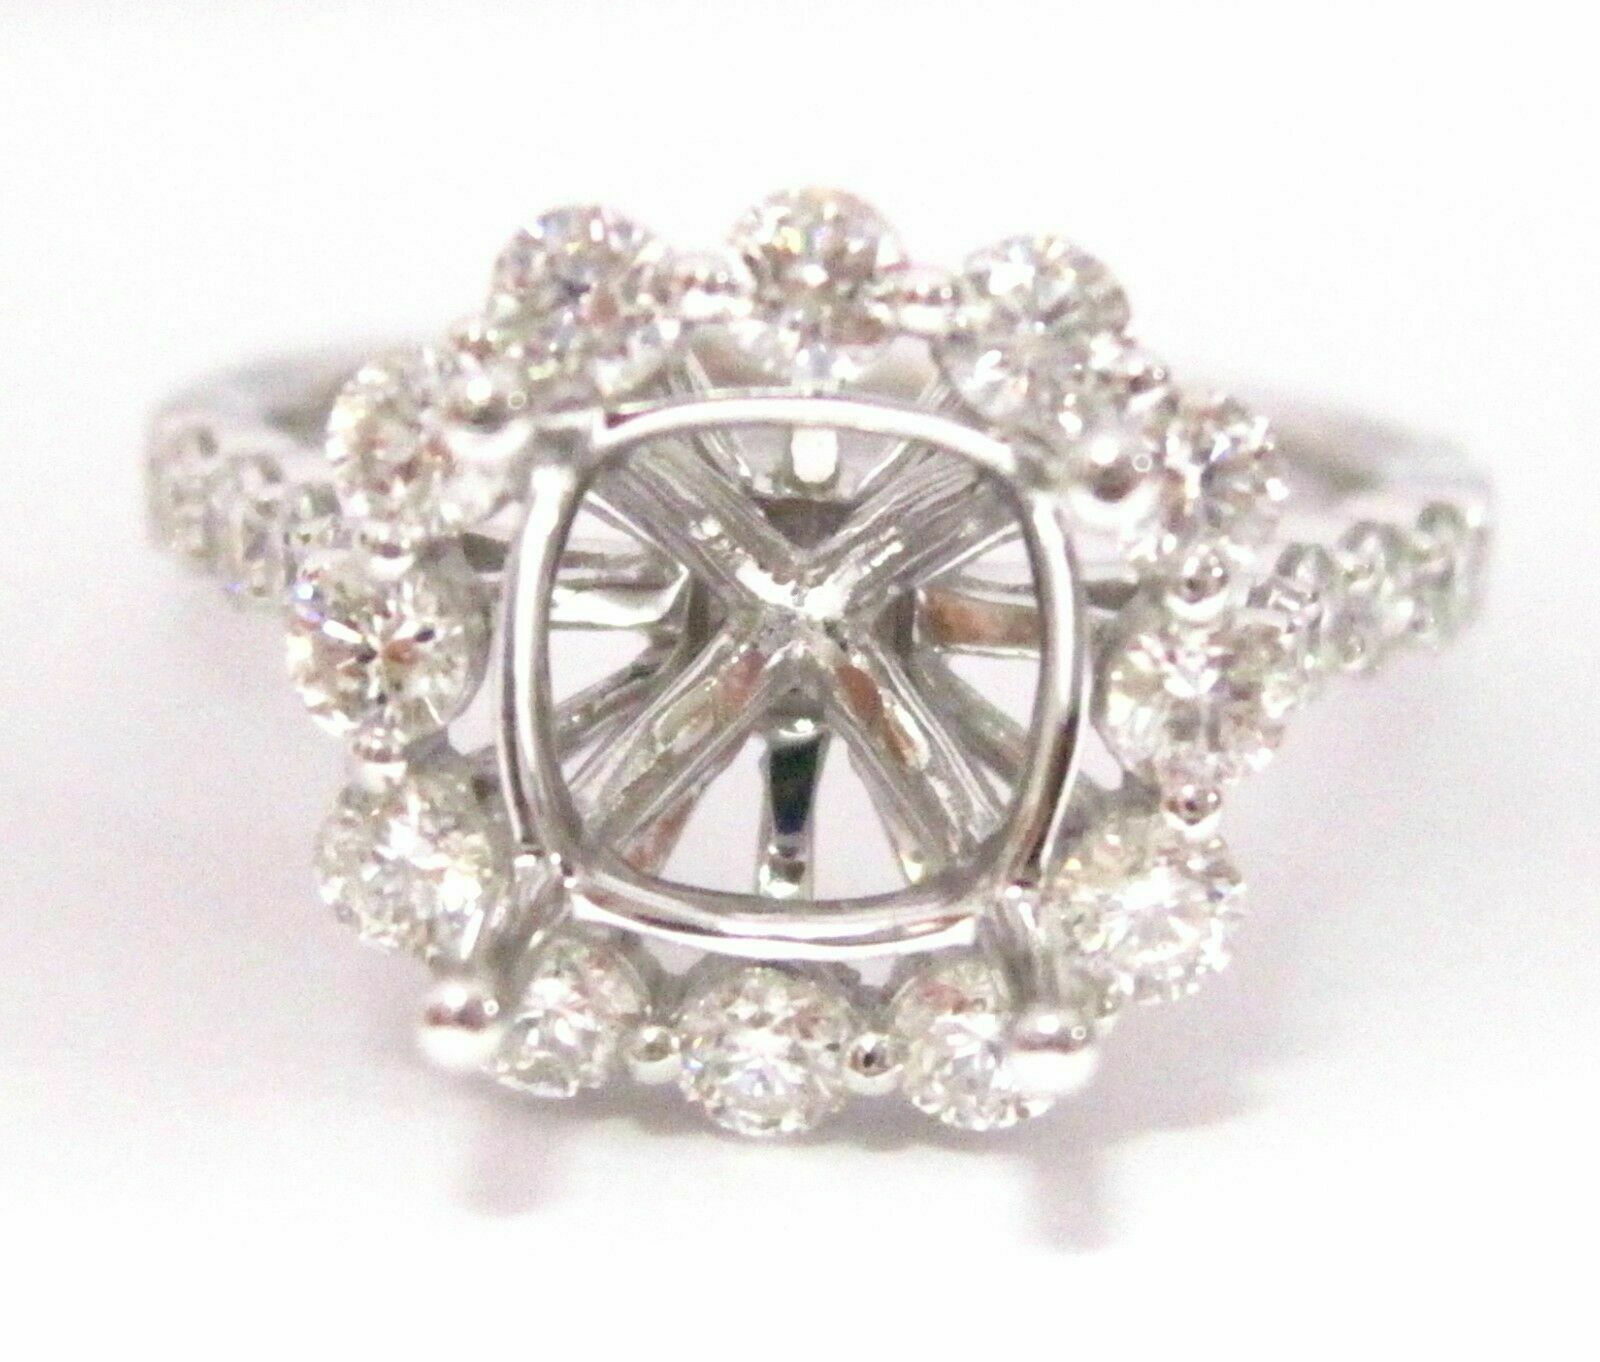 4 Prongs Semi-Mounting for Round or Cushion Diamond Ring Engagement 18k